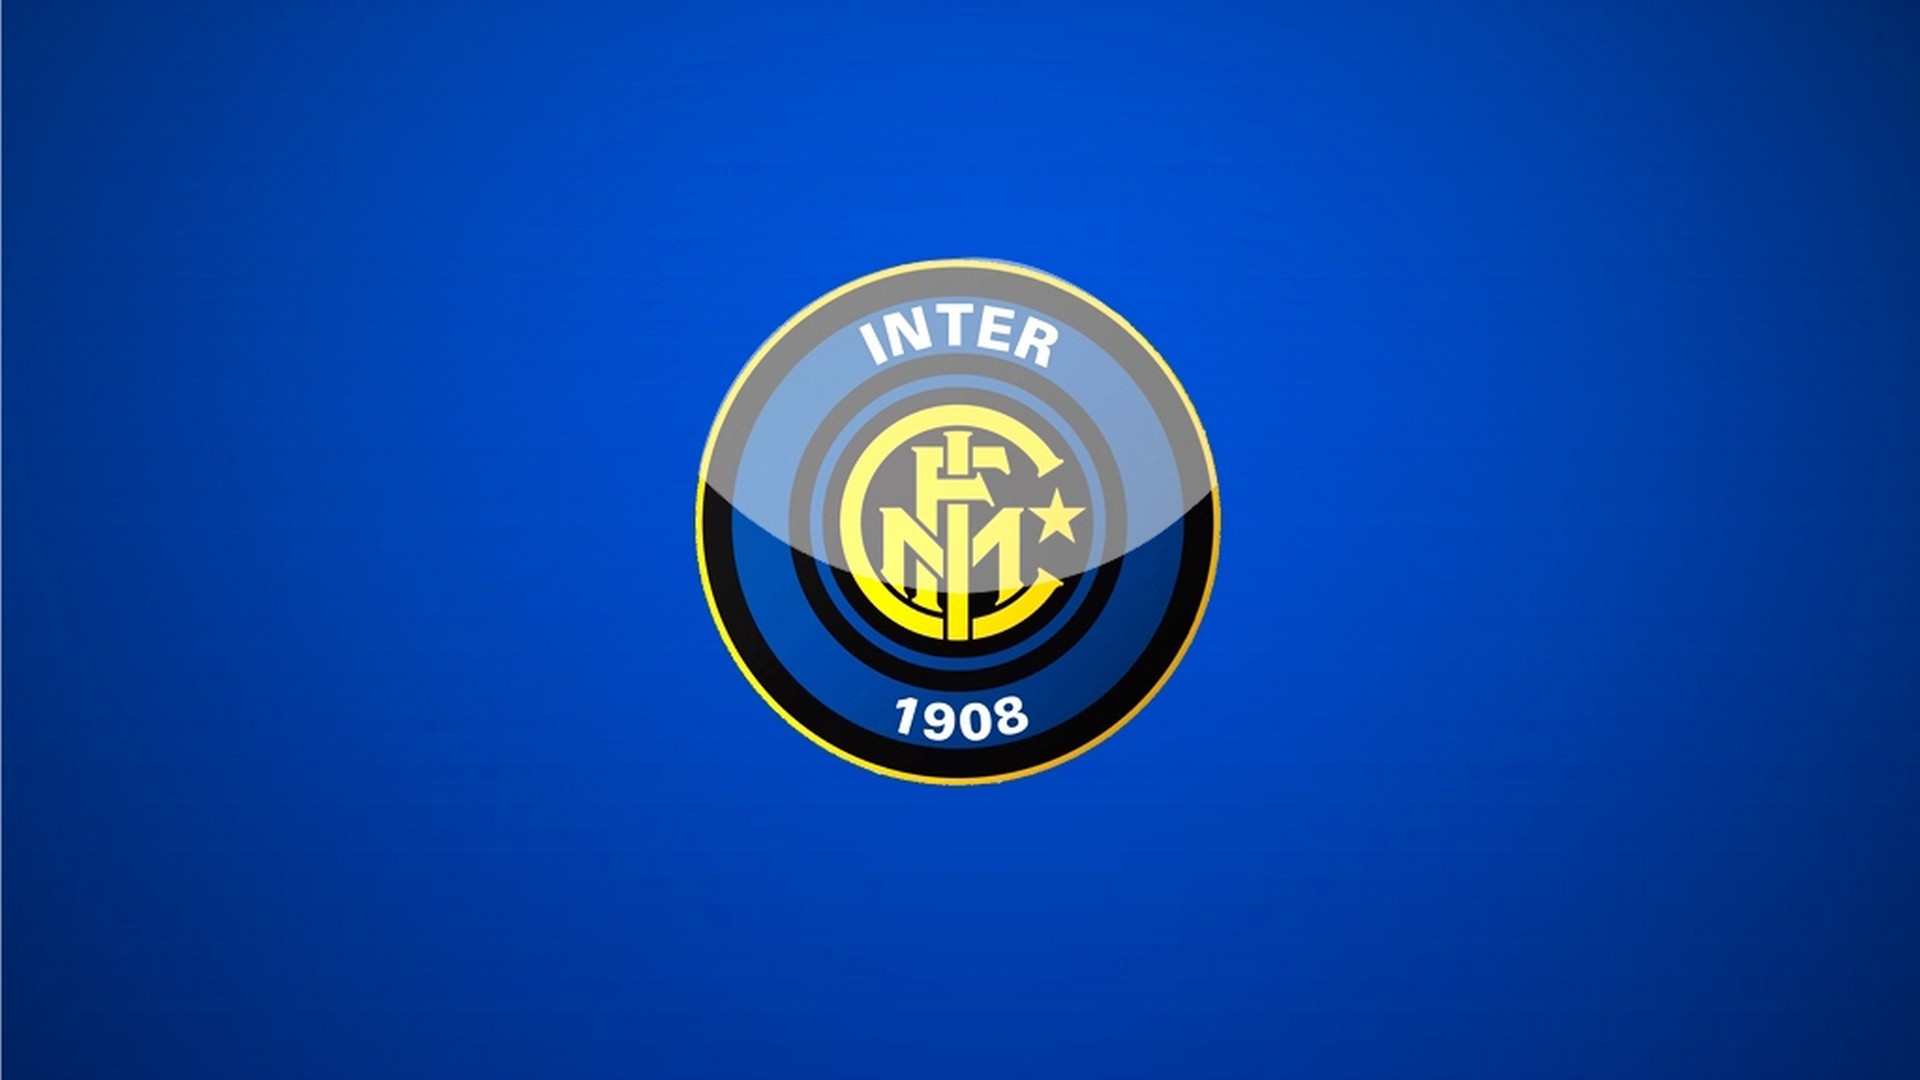 Inter Milan Wallpaper For Mac Backgrounds With high-resolution 1920X1080 pixel. You can use this wallpaper for your Desktop Computers, Mac Screensavers, Windows Backgrounds, iPhone Wallpapers, Tablet or Android Lock screen and another Mobile device